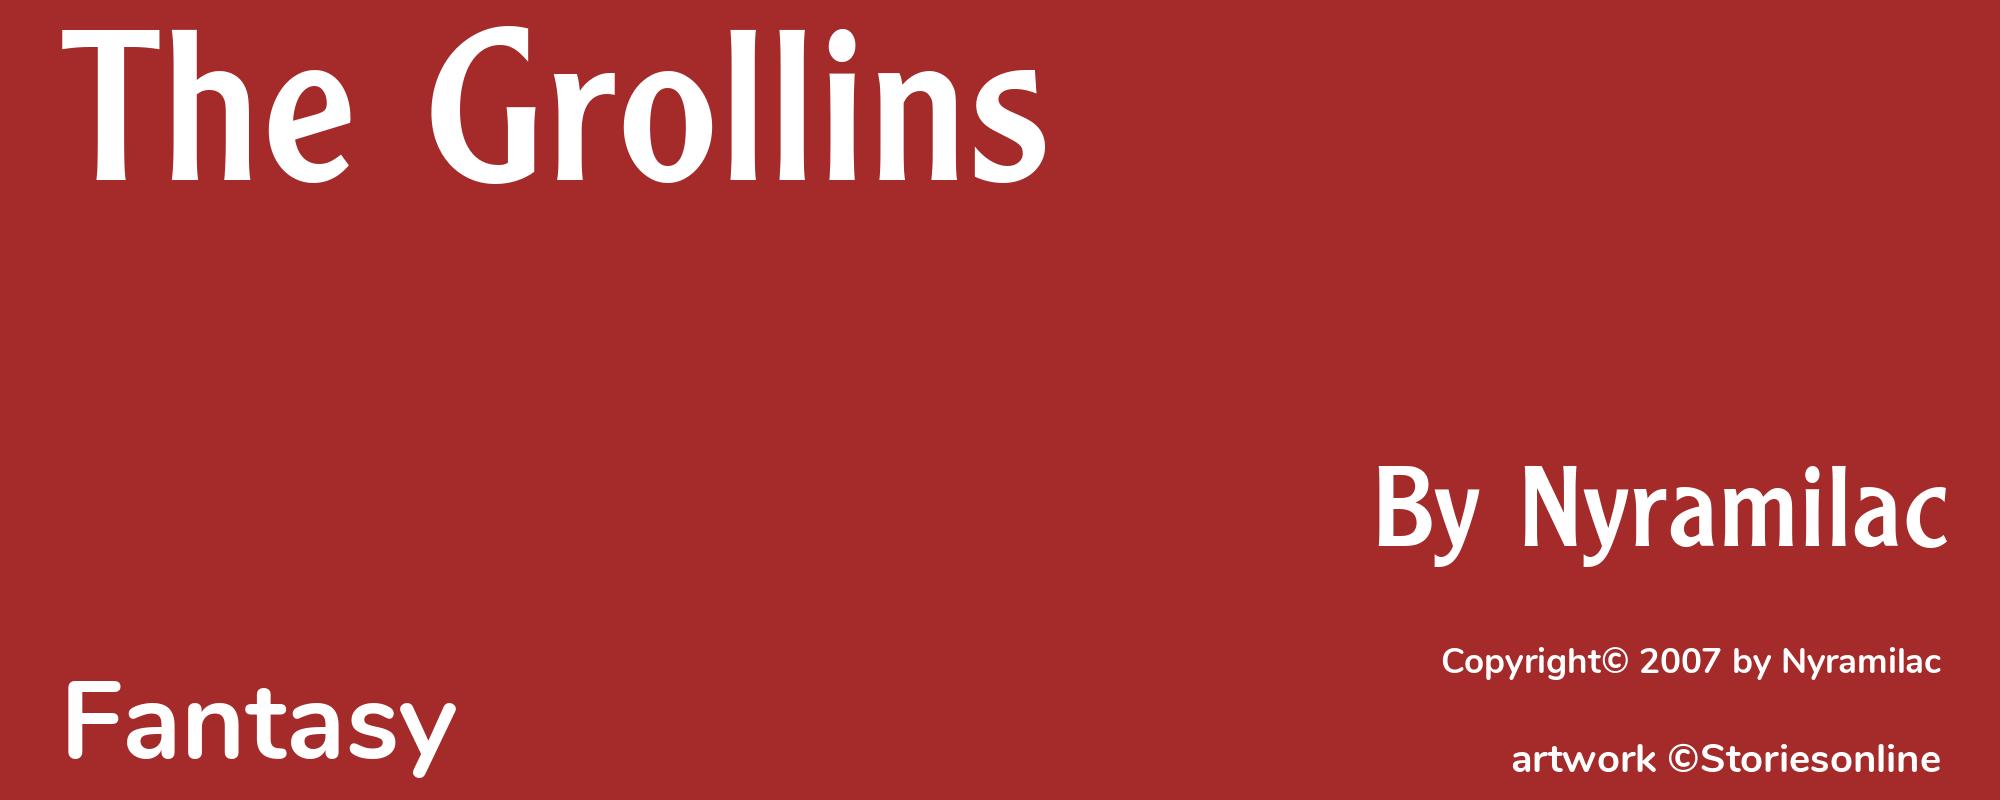 The Grollins - Cover